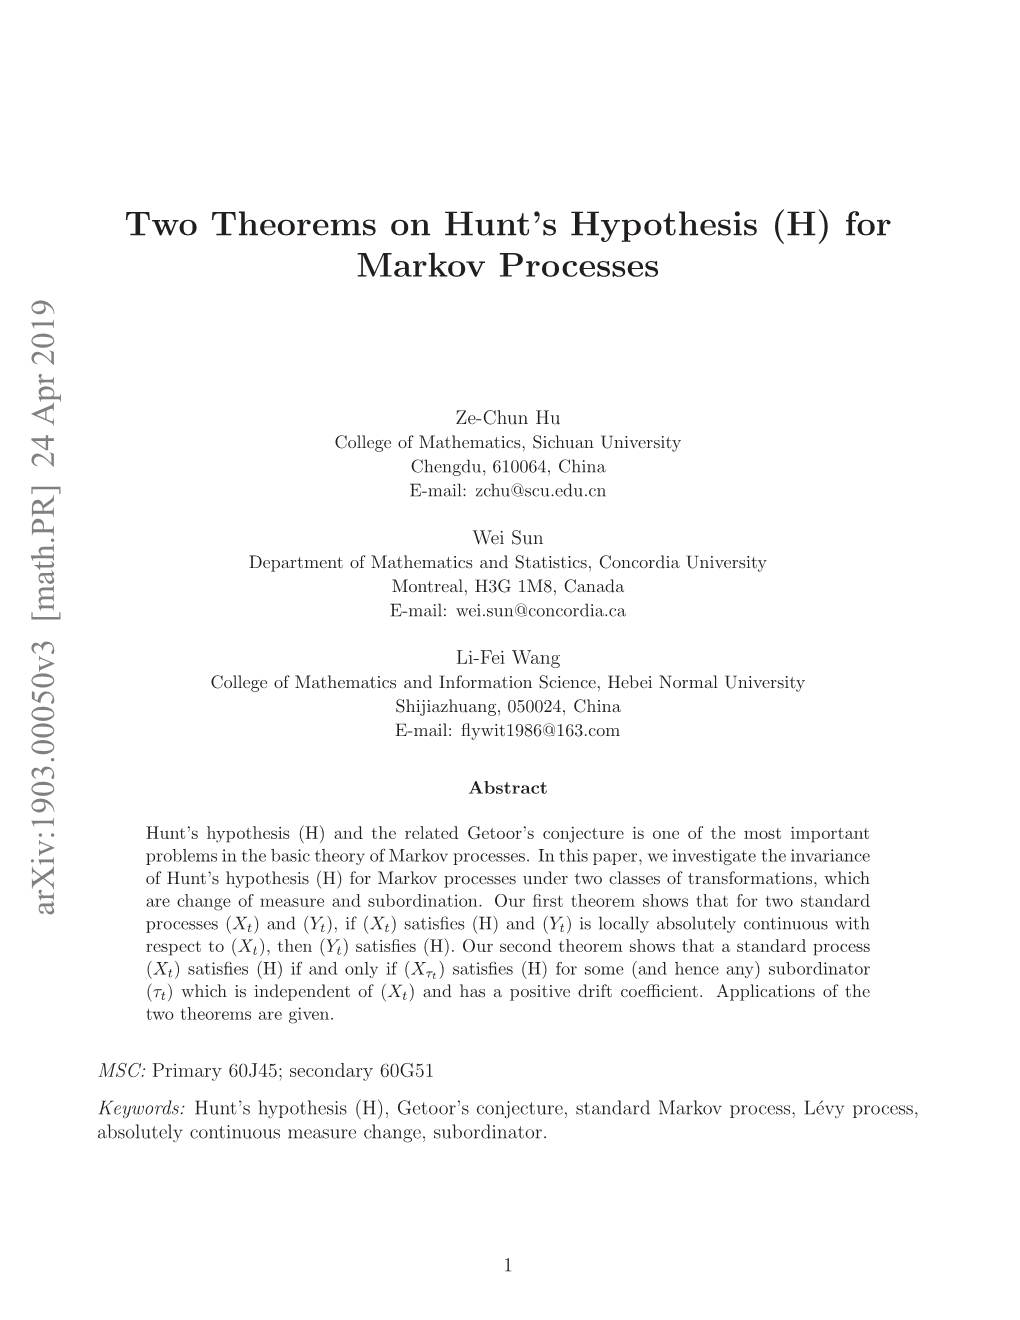 Two Theorems on Hunt's Hypothesis (H) for Markov Processes